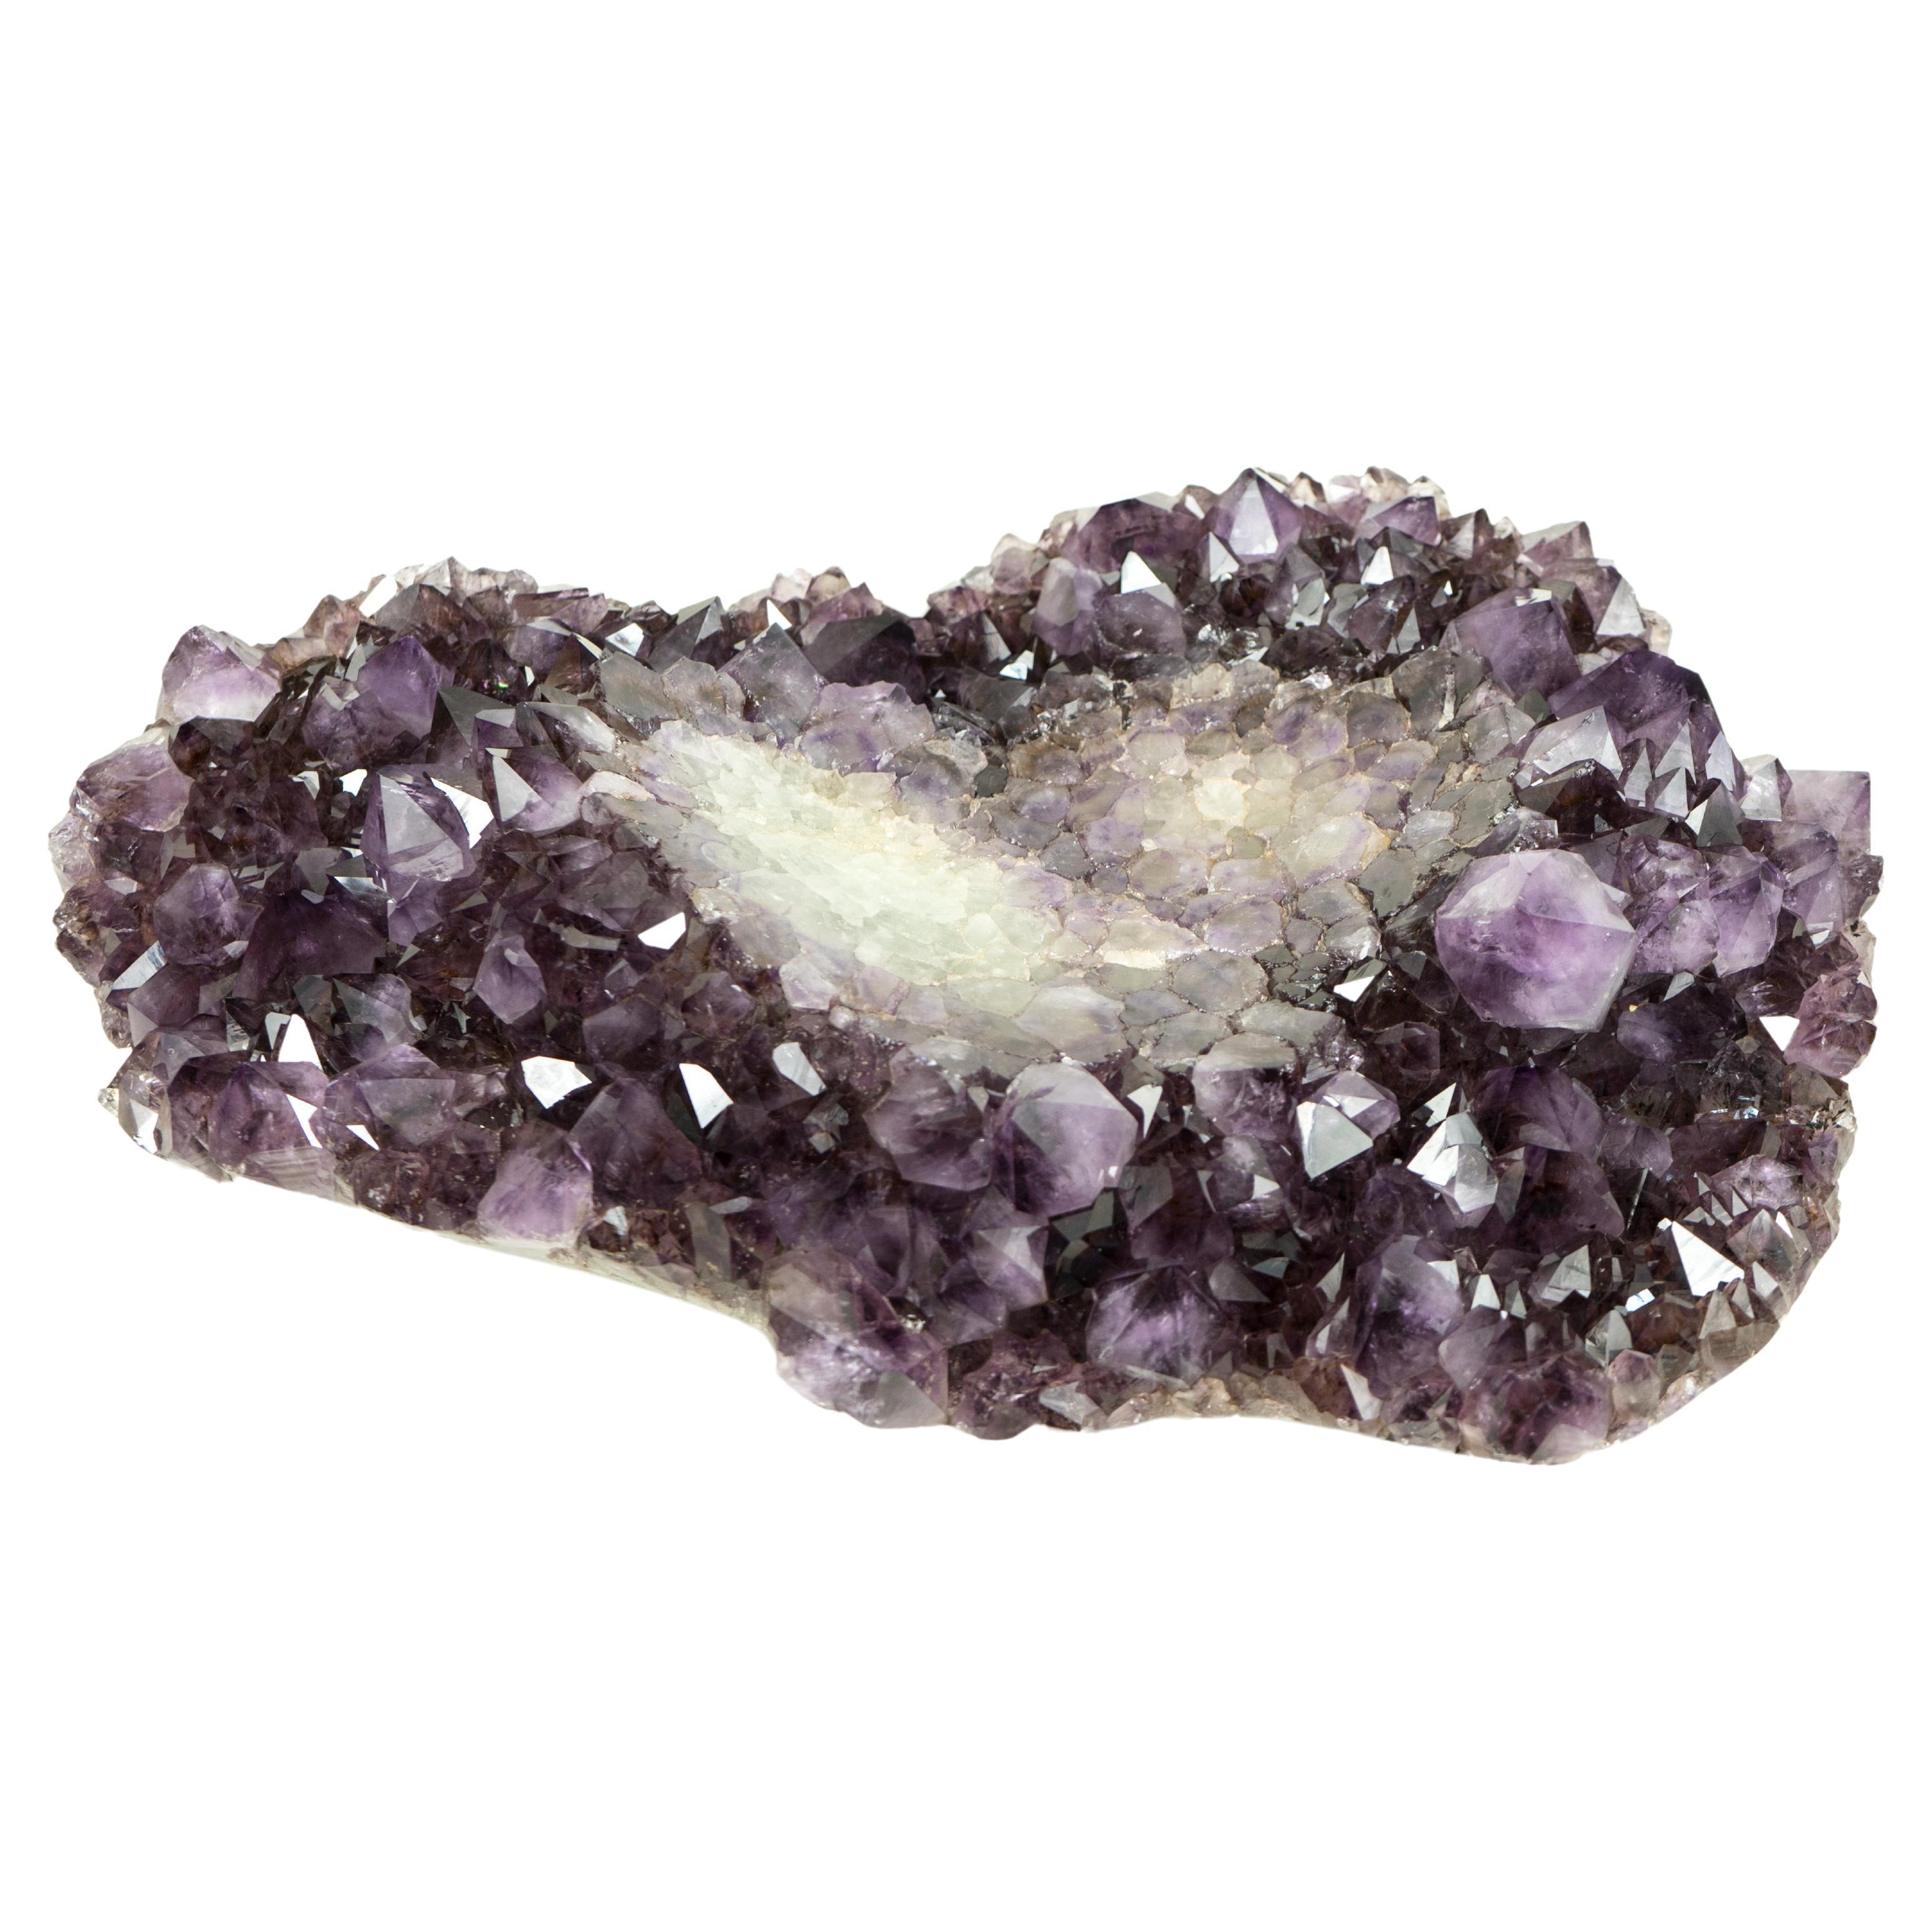 Natural Amethyst Decorative Crystal Bowl, Hand Carved Deep Purple Amethyst Plate